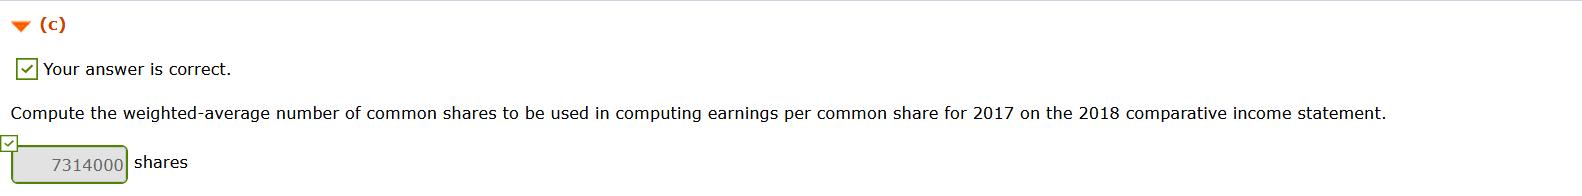 (c) Your answer is correct. Compute the weighted average number of common shares to be used in computing earnings per common